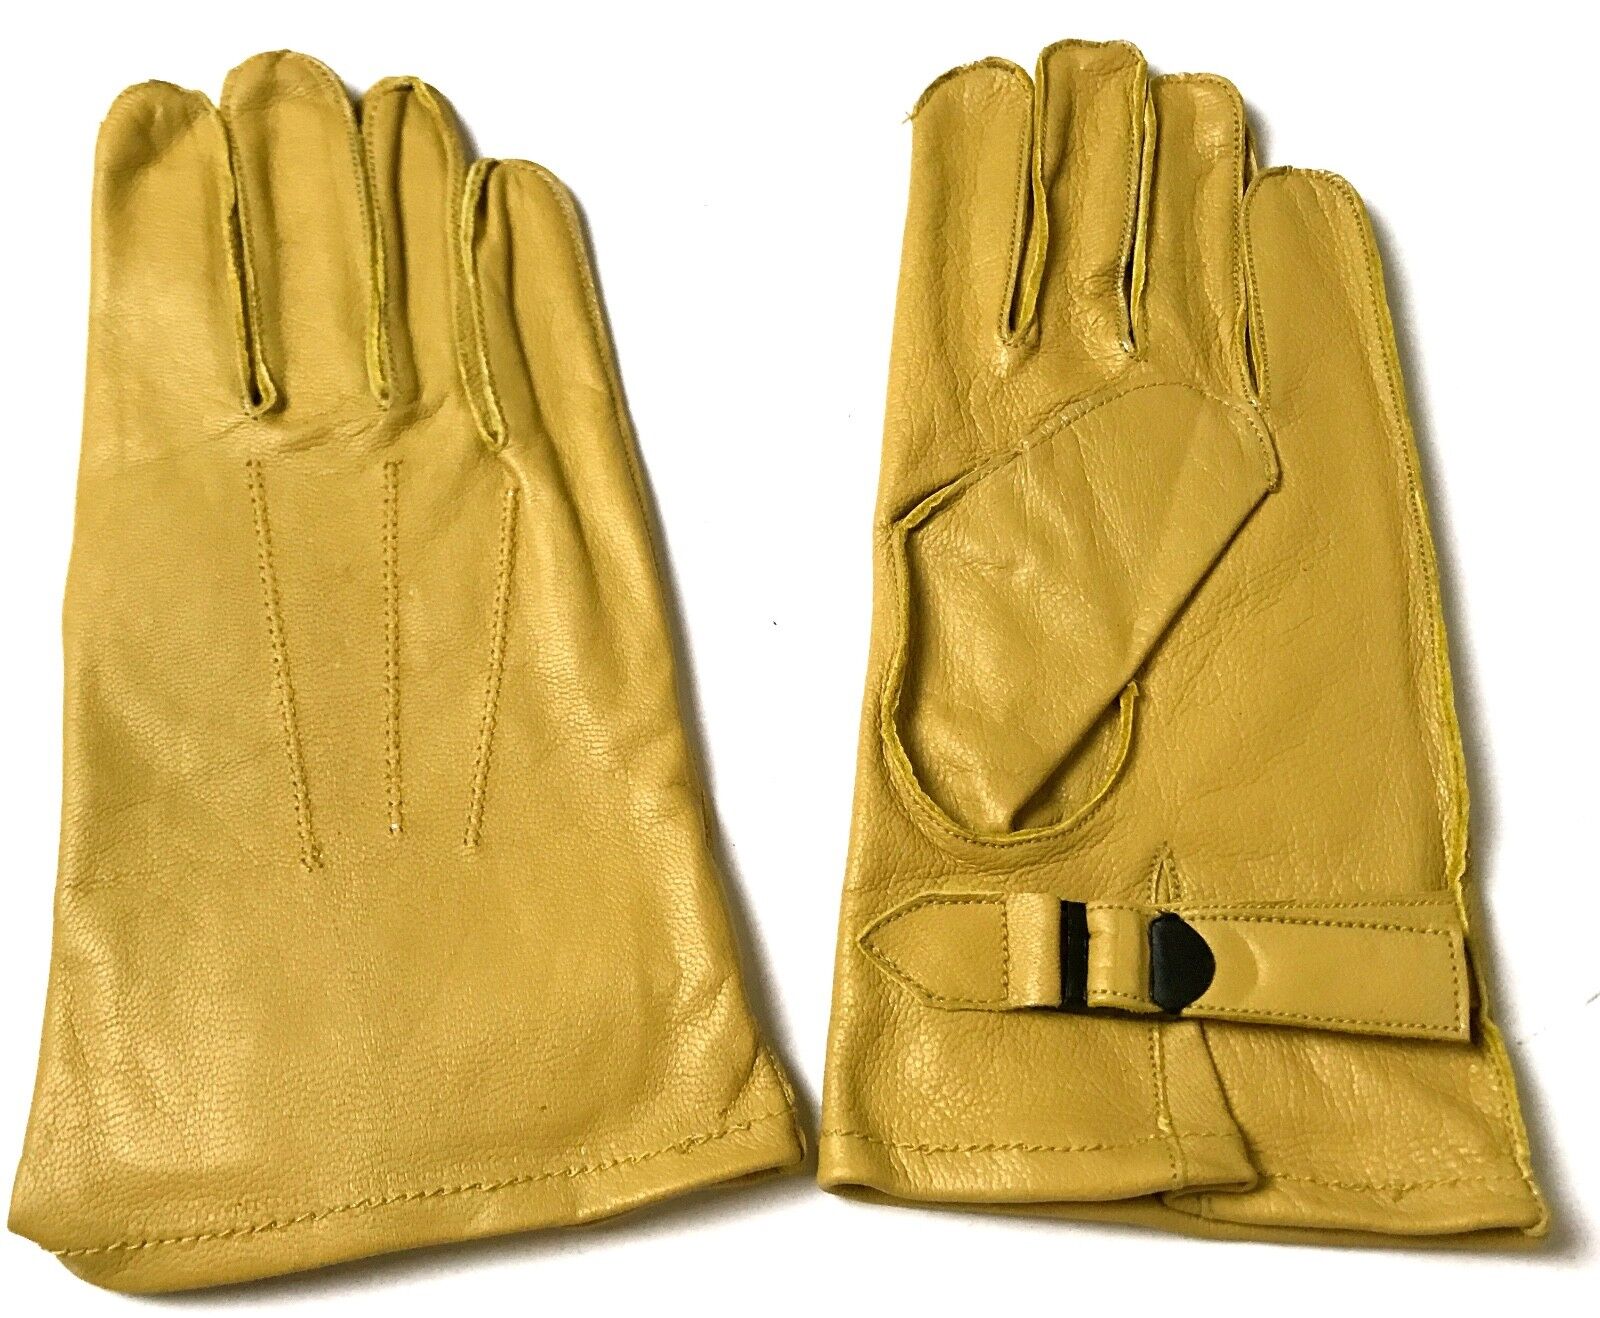  WWII US ARMY SHERMAN TANK TANKER LEATHER WORK GLOVES-LARGE